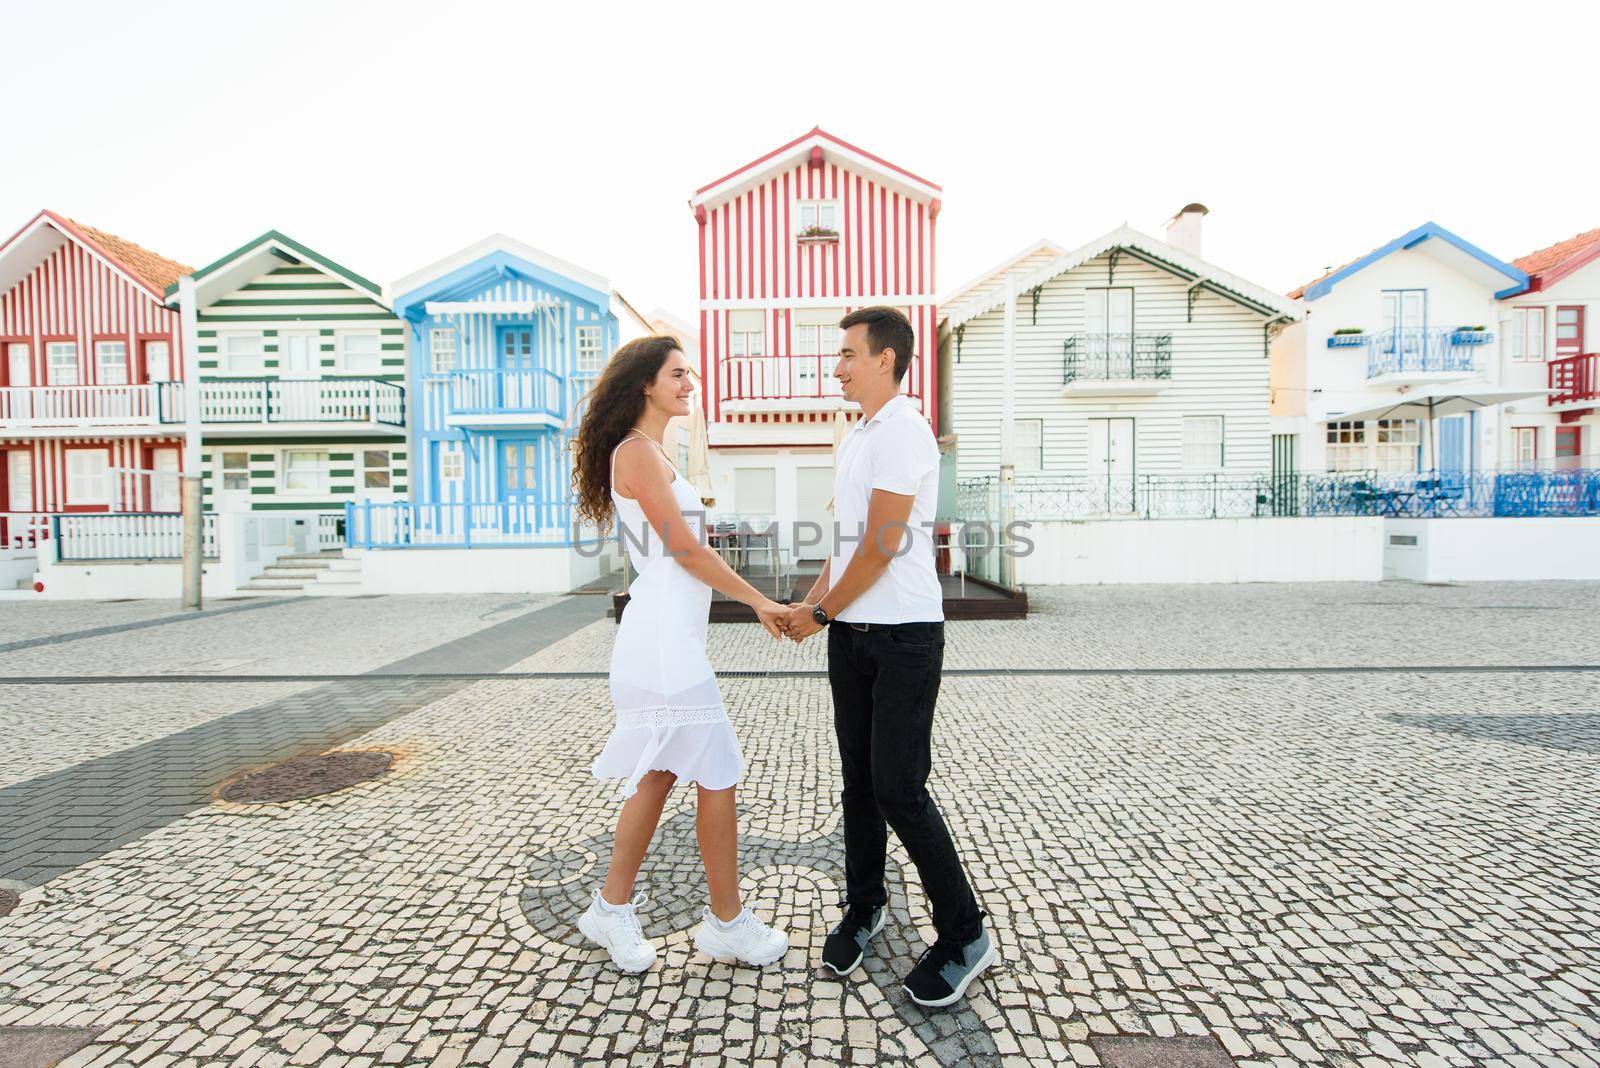 Love story of couple have dating and looks each others in Aveiro, Portugal near colourful and peaceful houses. Lifestyle. Having fun, laughs, smiles.